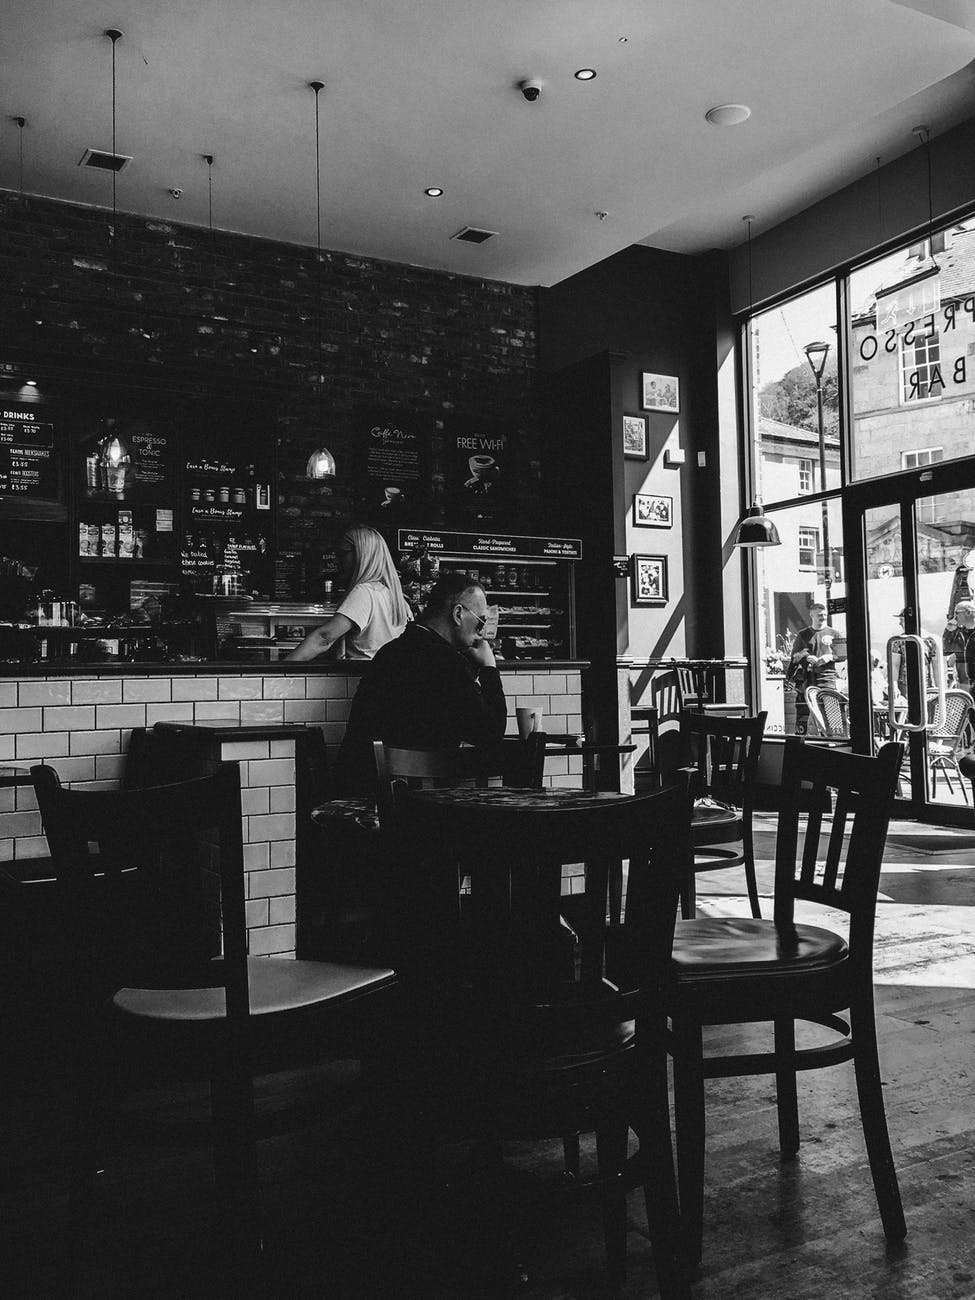 A man seating alone in a bar | Photo: Pexel